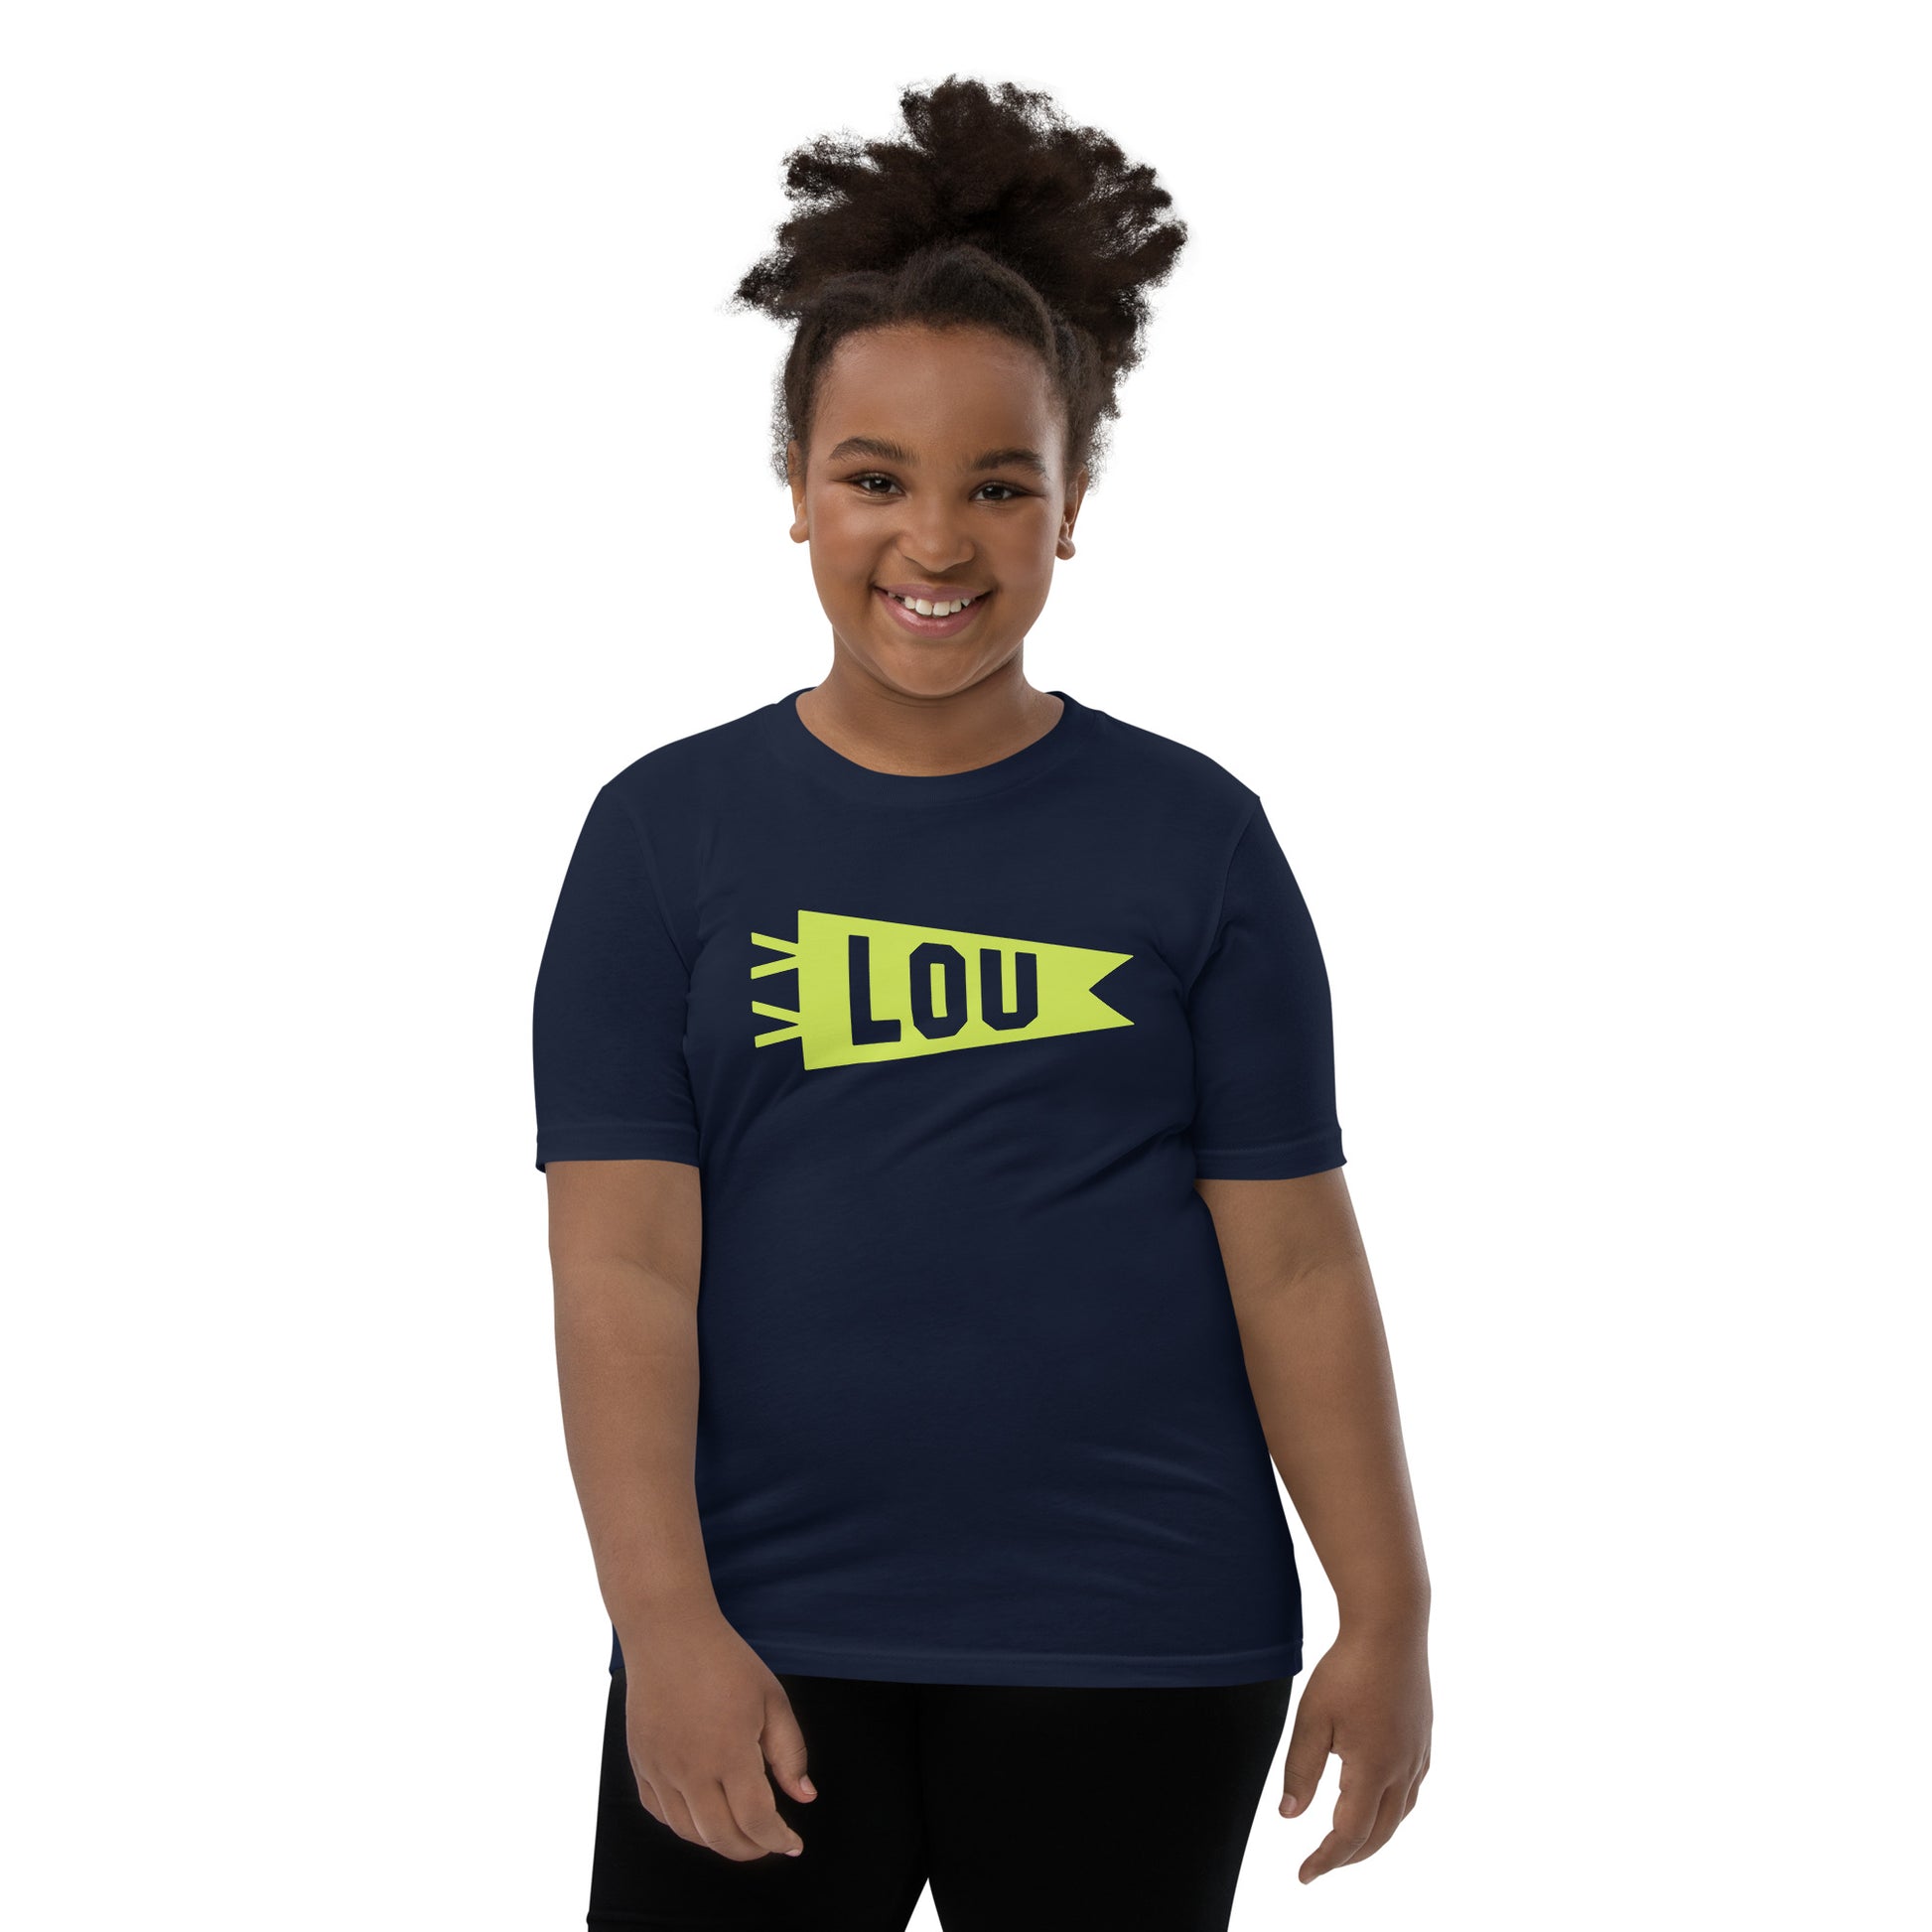 Kid's Airport Code Tee - Green Graphic • LOU Louisville • YHM Designs - Image 05